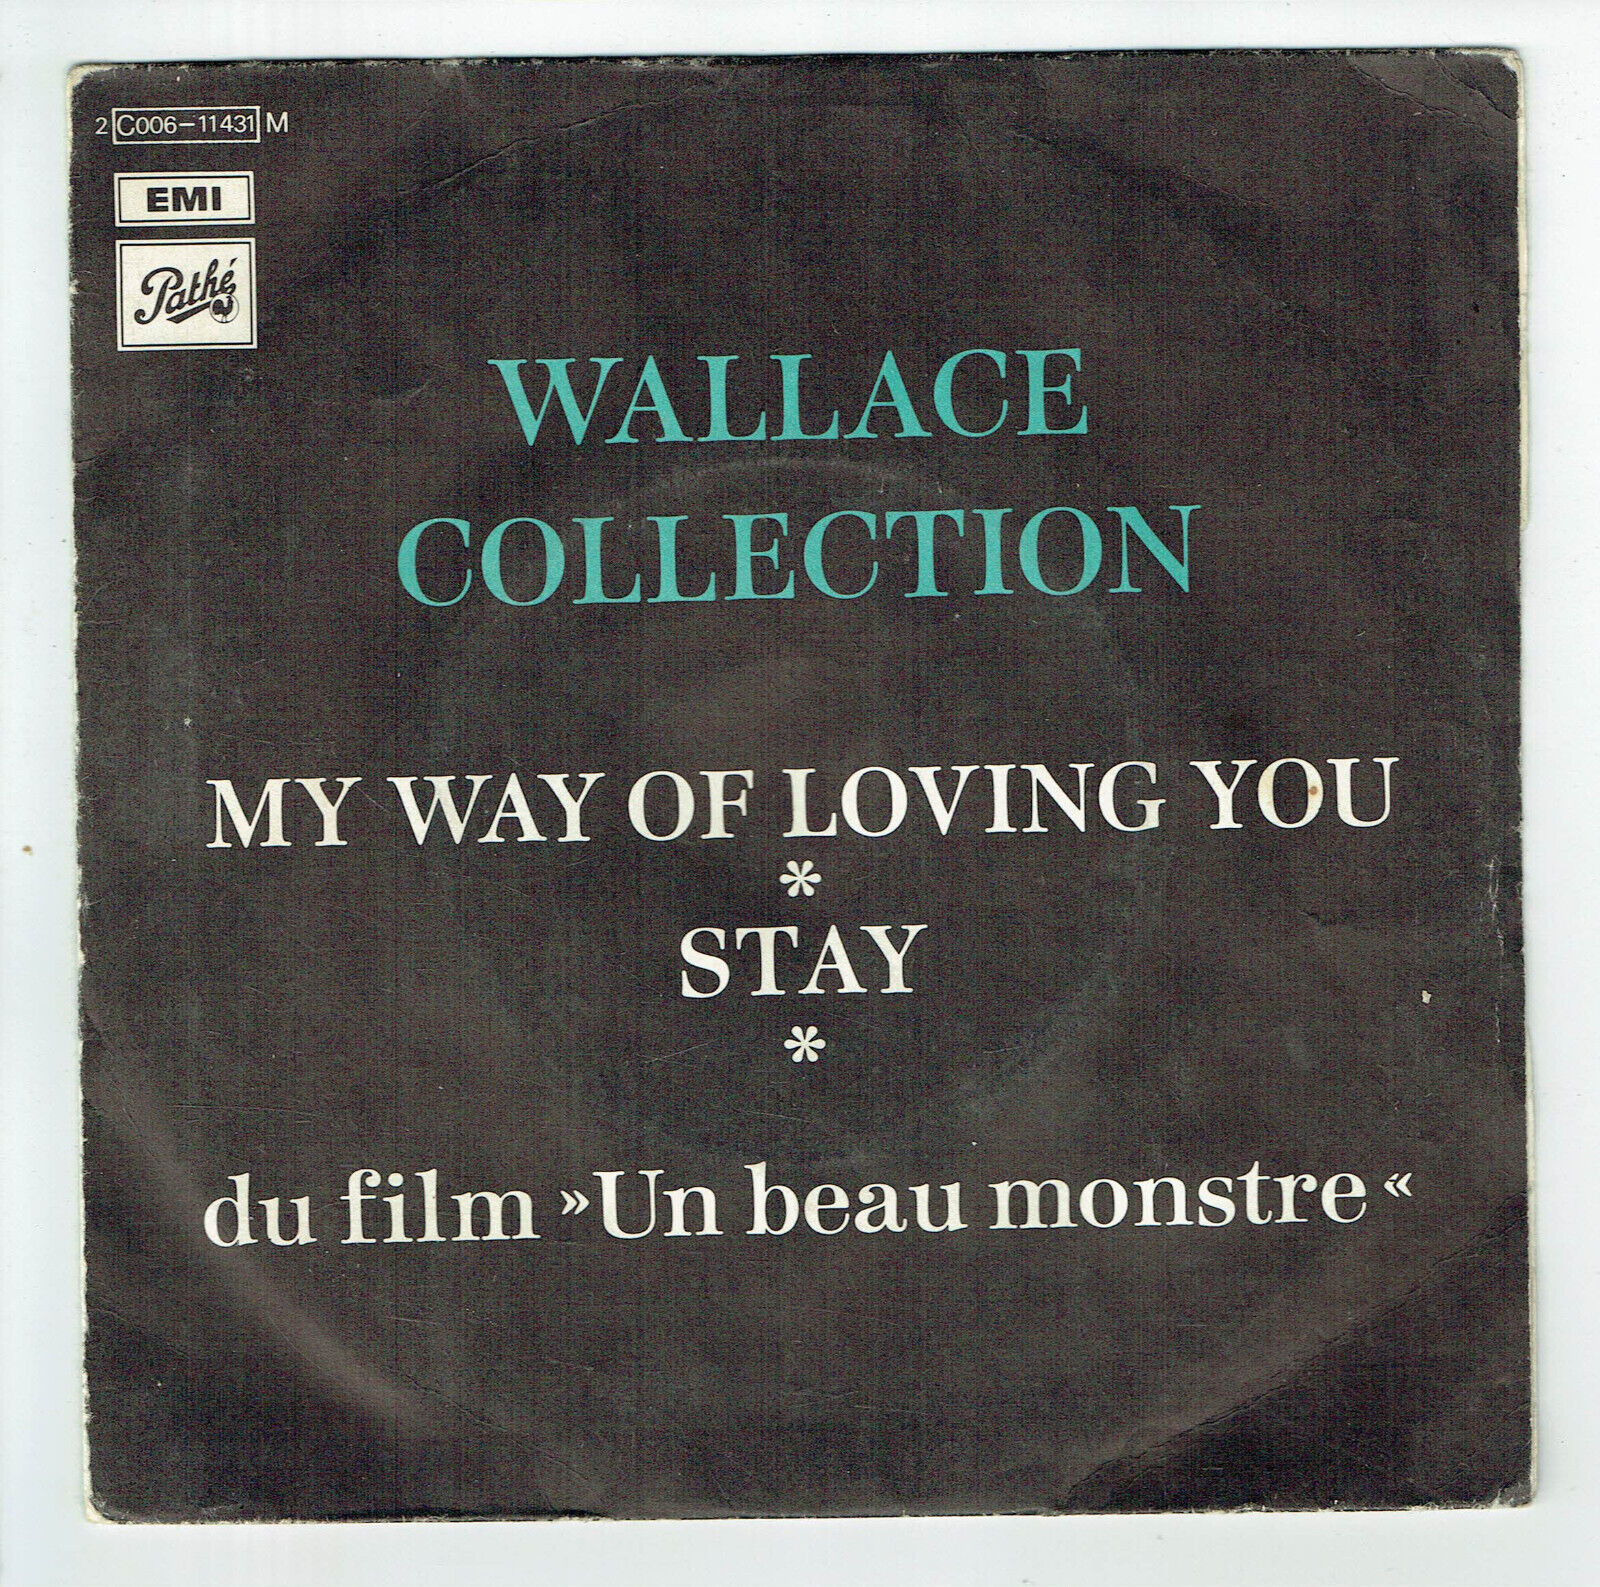 Wallace Collection Vinyl 45 RPM Stay - My Way Film " Un Beau Monster Pathe